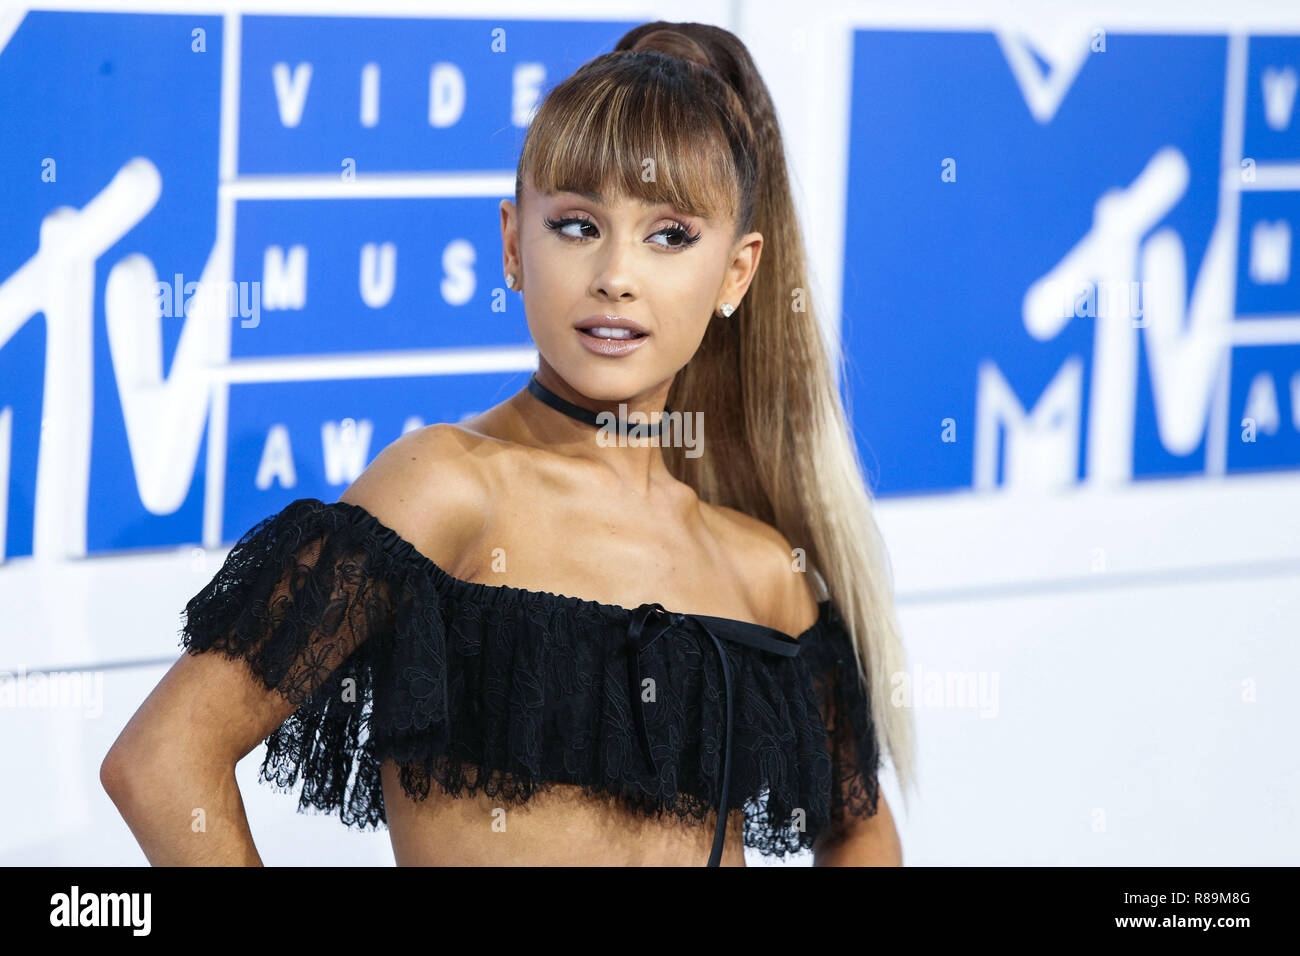 (FILE) Ariana Grande and Pete Davidson end engagement. The romance between 'Sweetener' singer Ariana Grande and 'SNL' performer Pete Davidson has turned sour. The couple, whose whirlwind romance-turned-engagement powered the celebrity gossip machine through the summer, has split, a source close to the singer tells CNN. Davidson confirmed their engagement in June. They had been dating a few weeks at the time. MANHATTAN, NEW YORK CITY, NY, USA - AUGUST 28: Singer Ariana Grande wearing an Alexander Wang outfit arrives at the 2016 MTV Video Music Awards at held at Madison Square Garden on August 2 Stock Photo